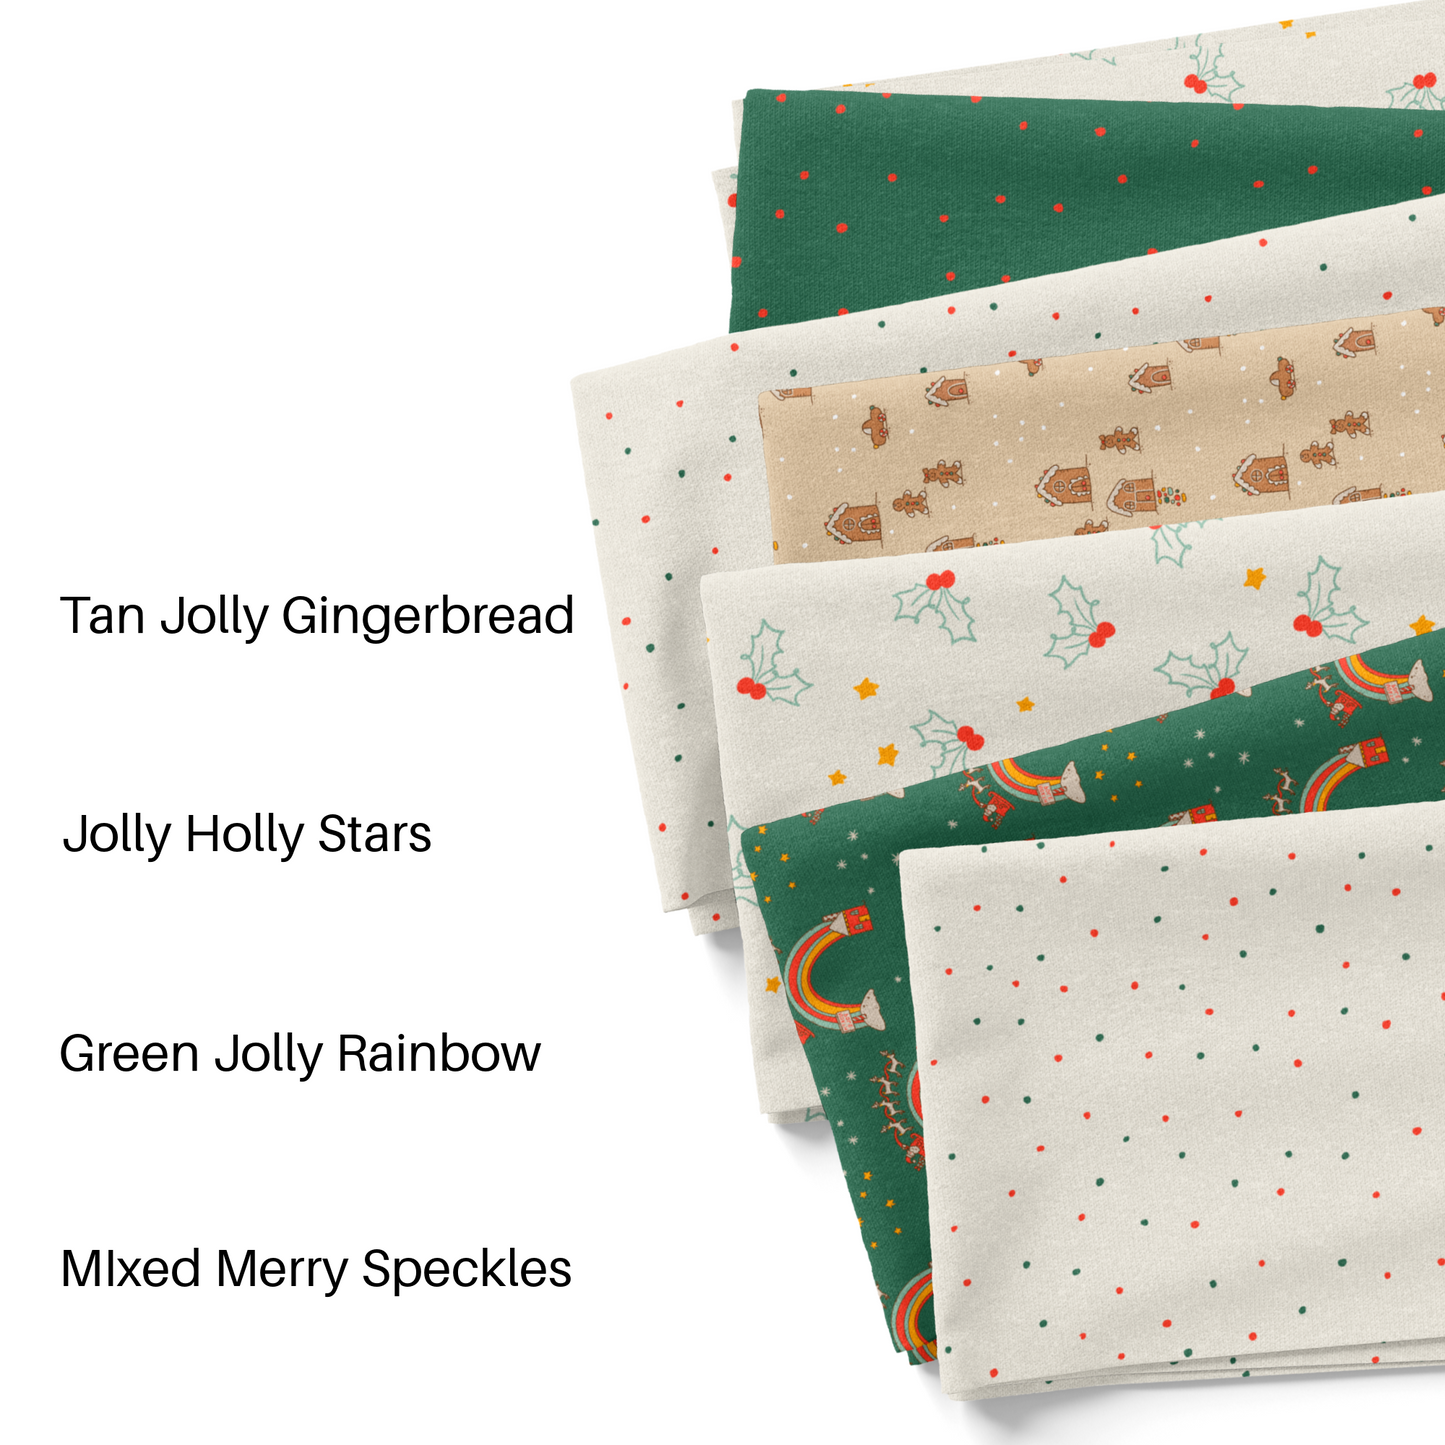 Green and cream Wild Daisy Christmas collection fabric by the yard swatches.